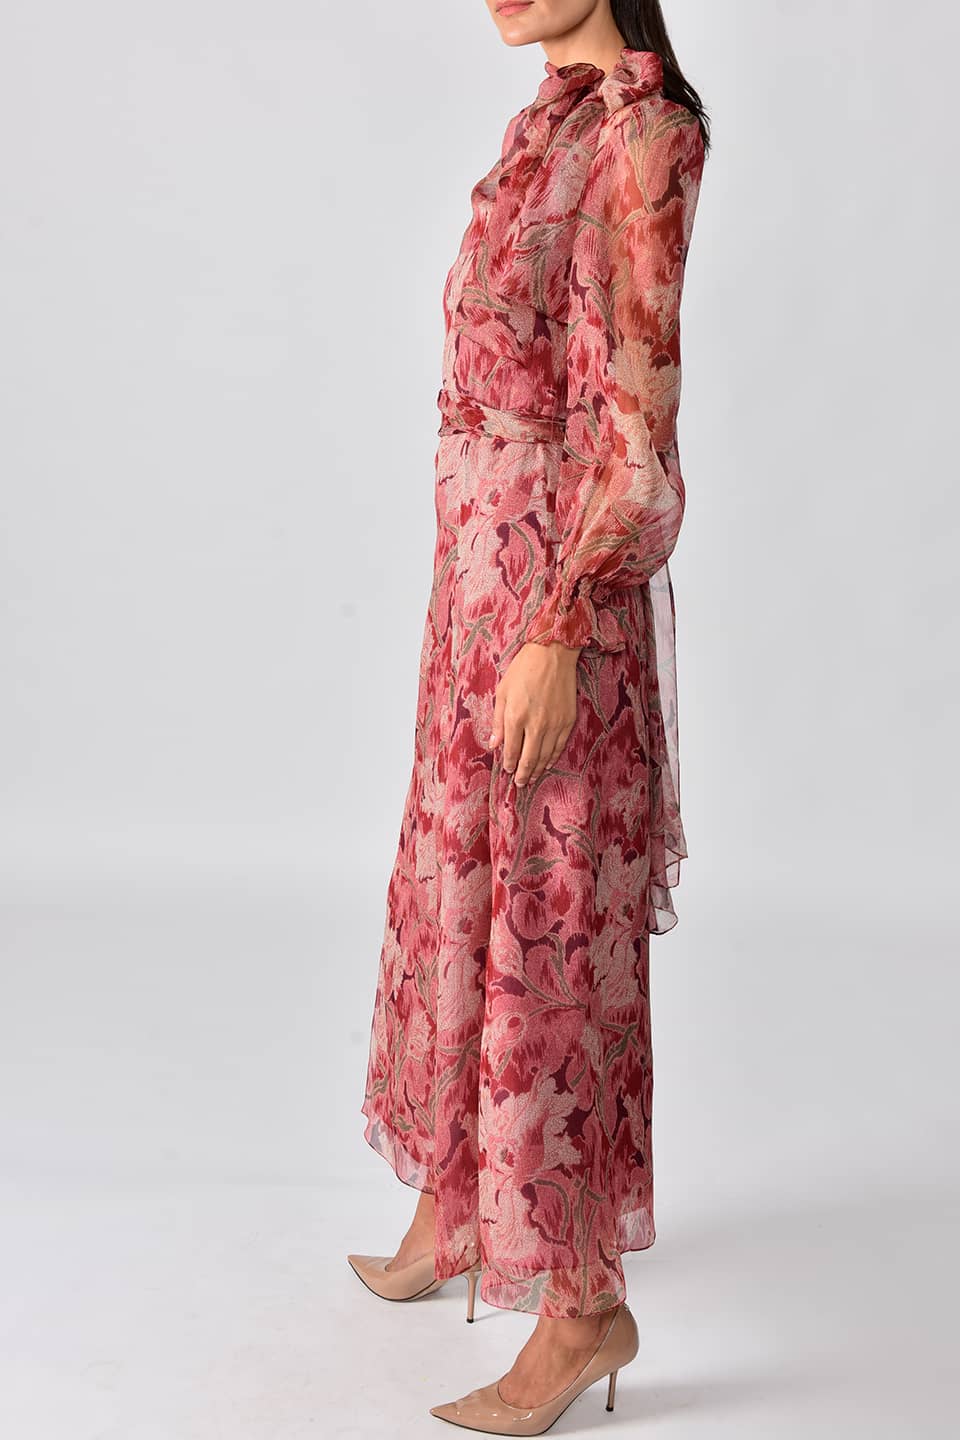 Thumbnail for Product gallery 2, Model wearing floral print silk chiffon long dress in a burgundy garden print from stylist Vilshenko, posing on left side